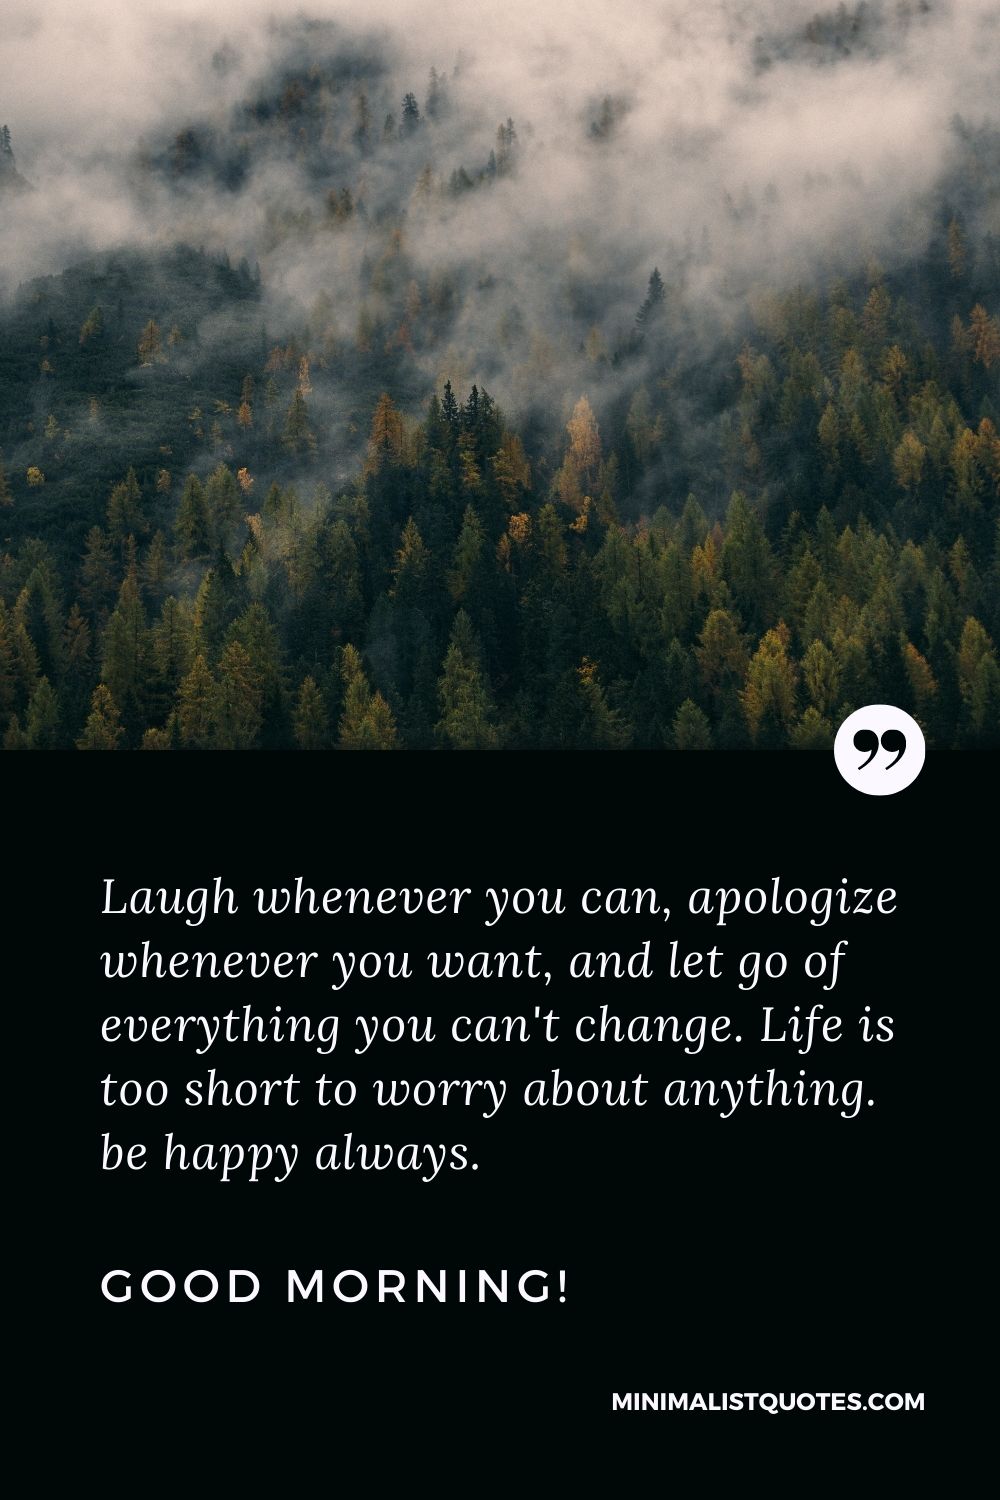 Deep Morning Message For Whatsapp: Laugh whenever you can, apologize whenever you want, and let go of everything you can't change. Life is too short to worry about anything. be happy always. Good Morning!